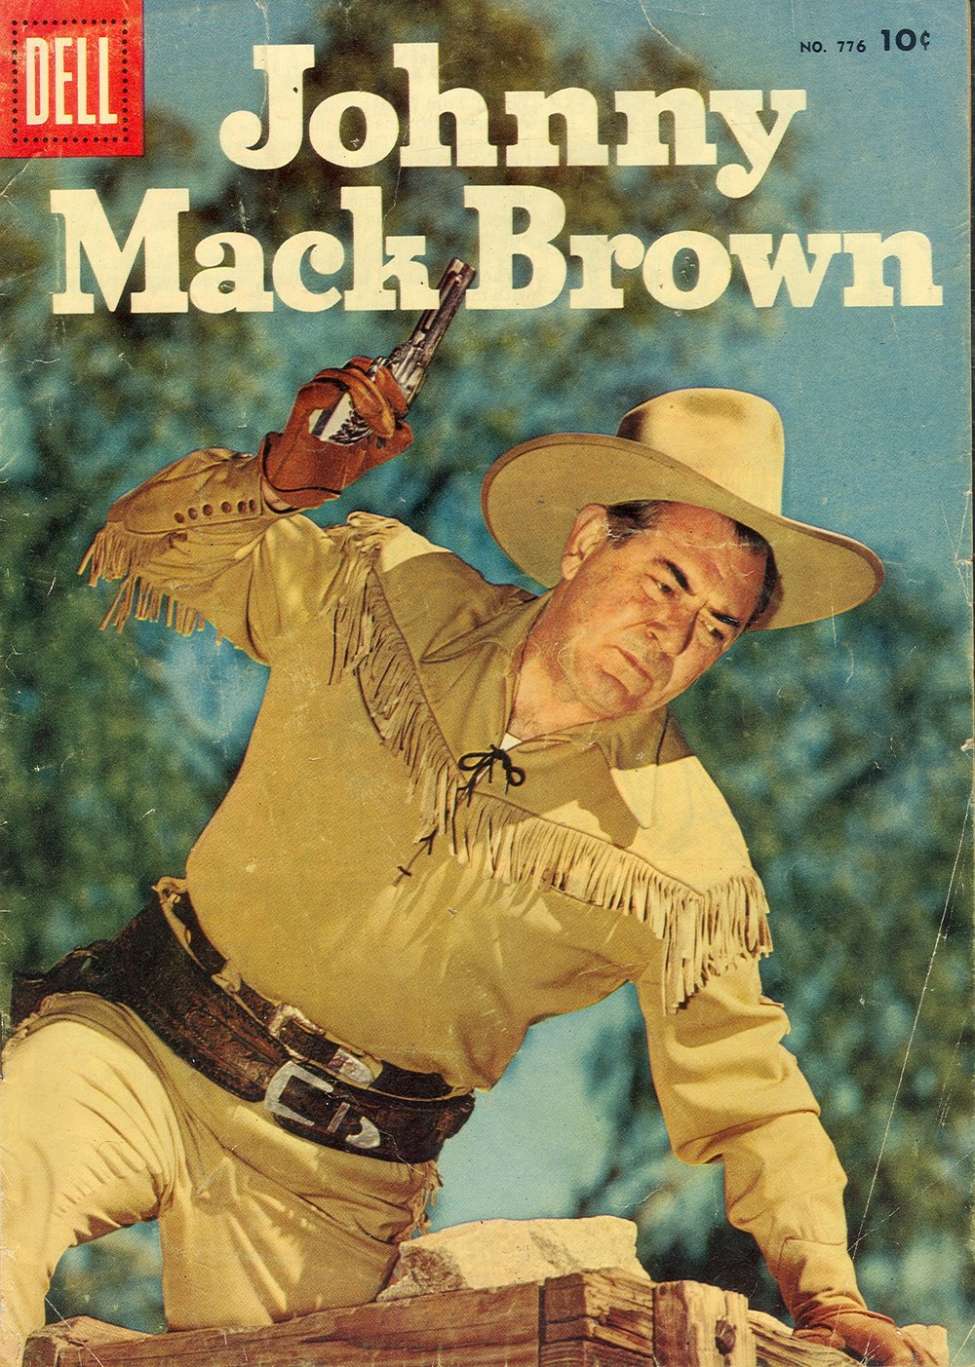 Book Cover For 0776 - Johnny Mack Brown